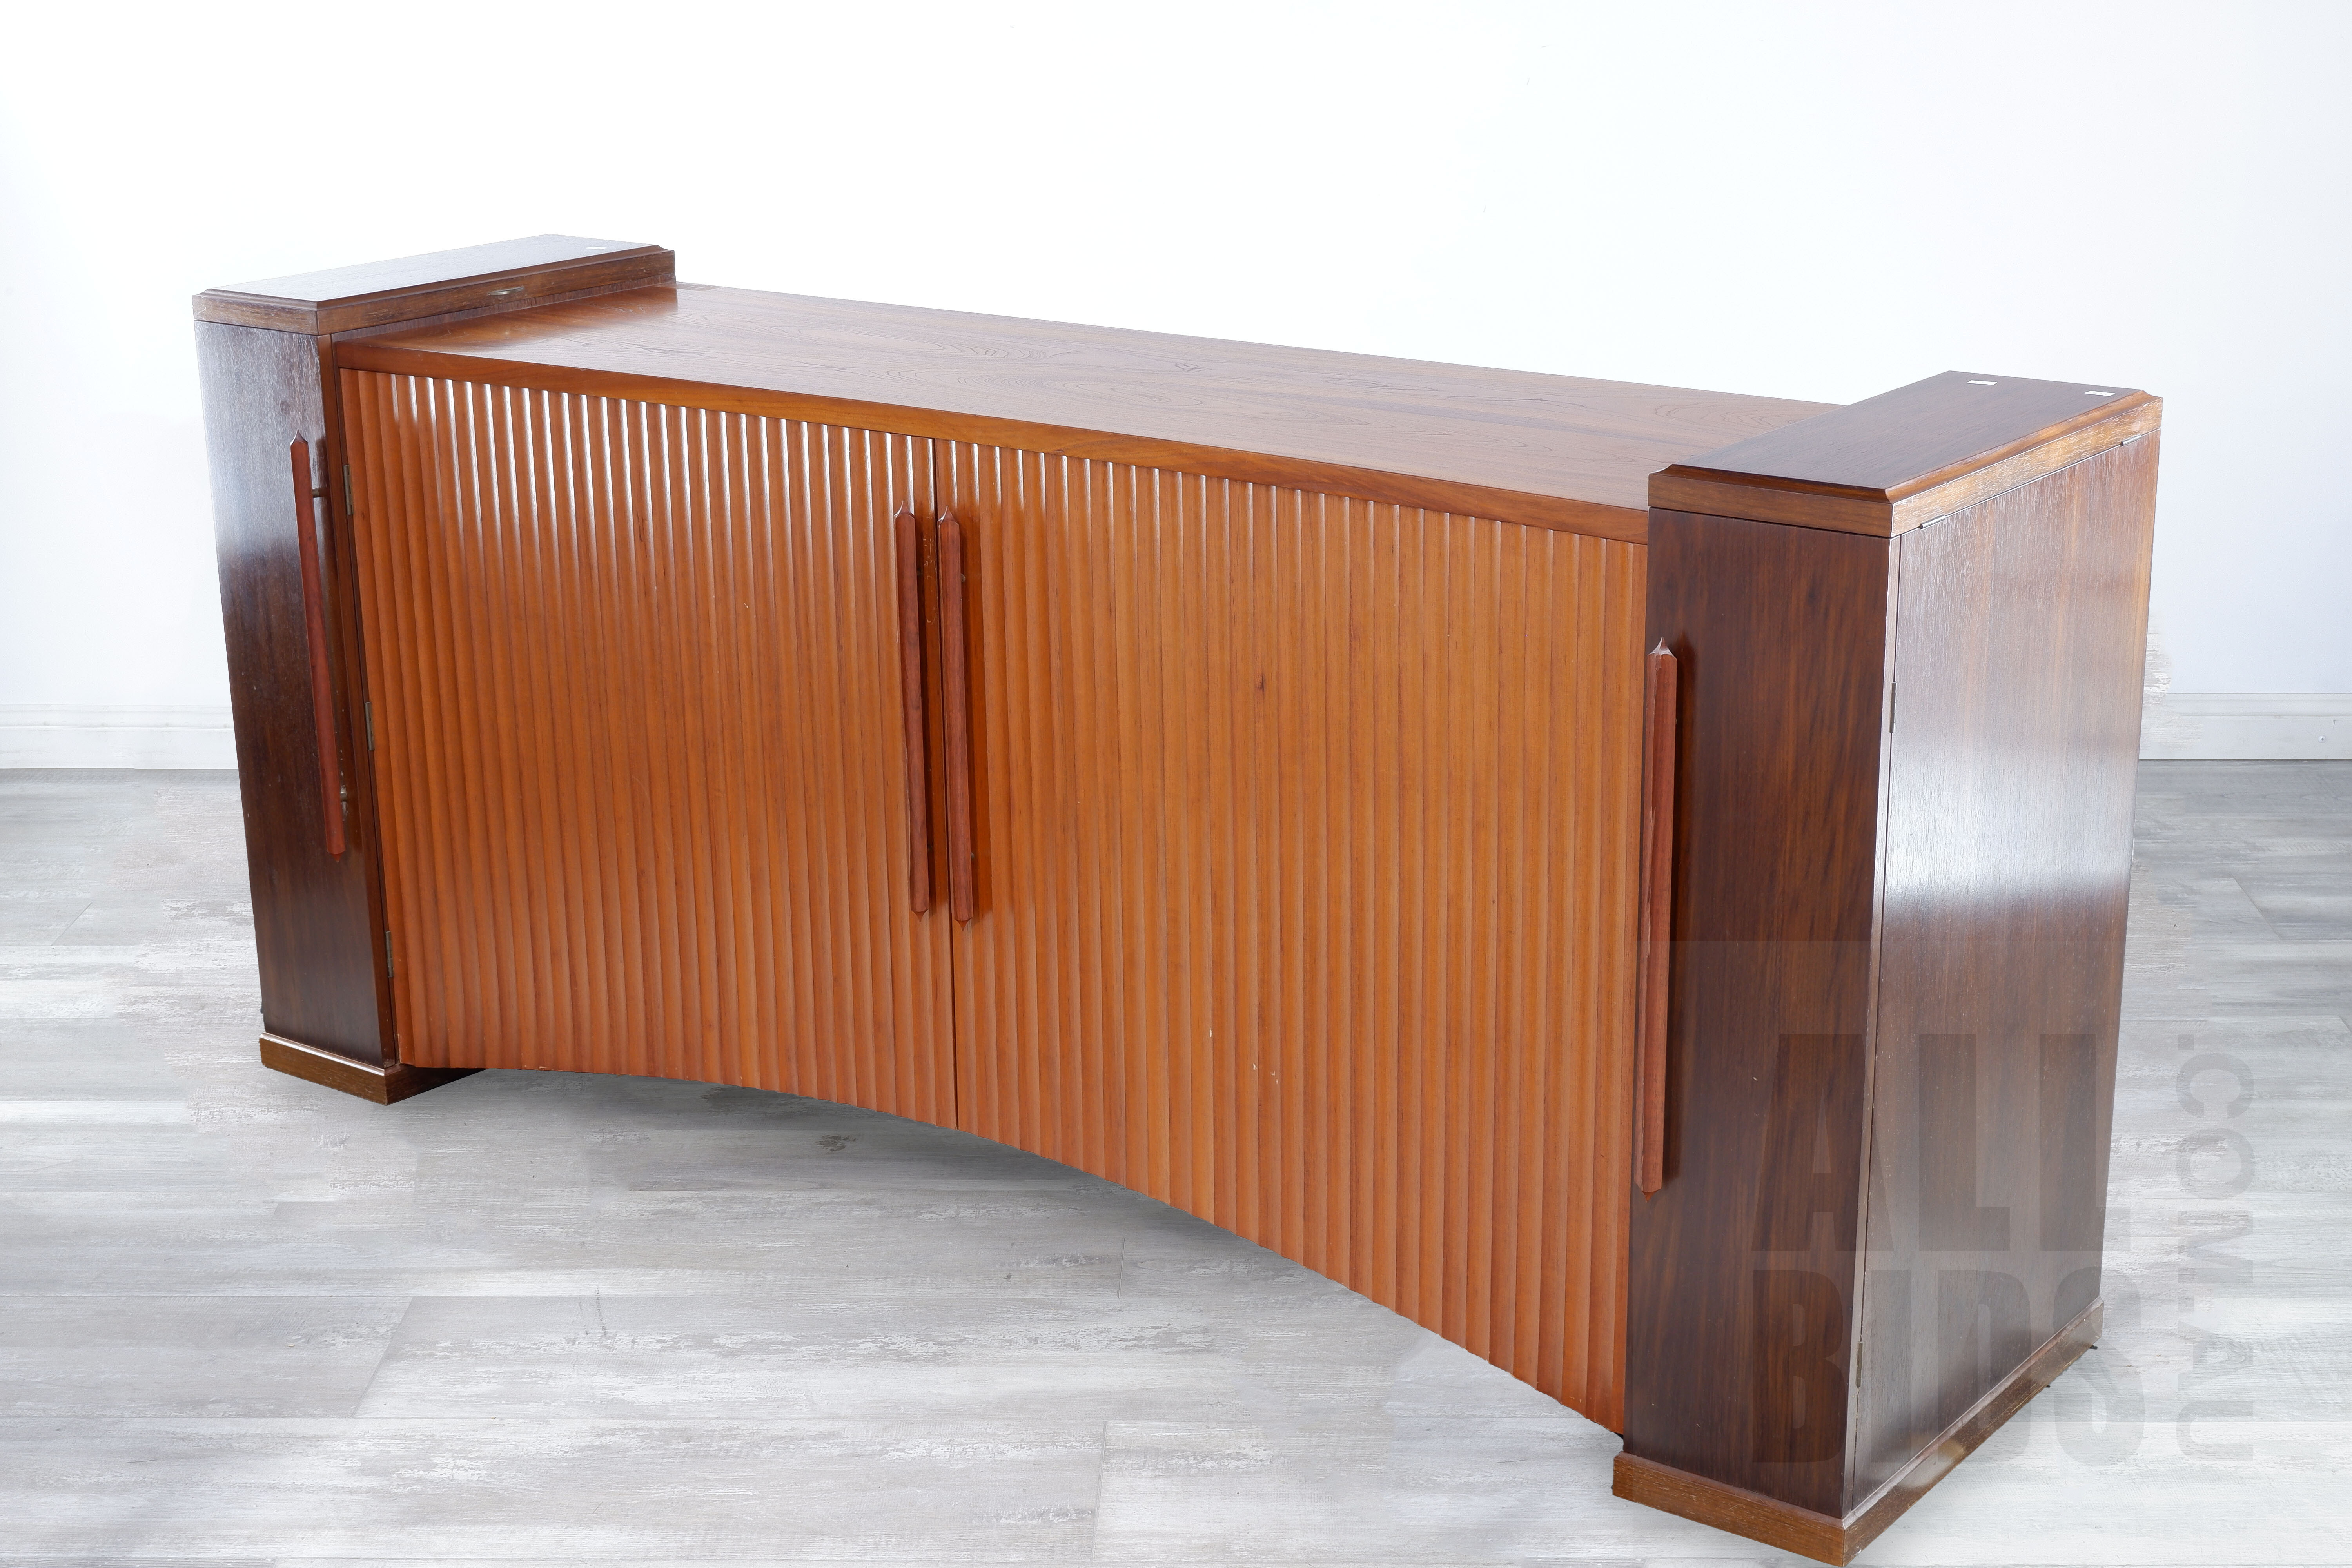 'Bespoke David Upfill Brown Cedar and Tasmanian Blackwood Sideboard, Commissioned in the 1990s'